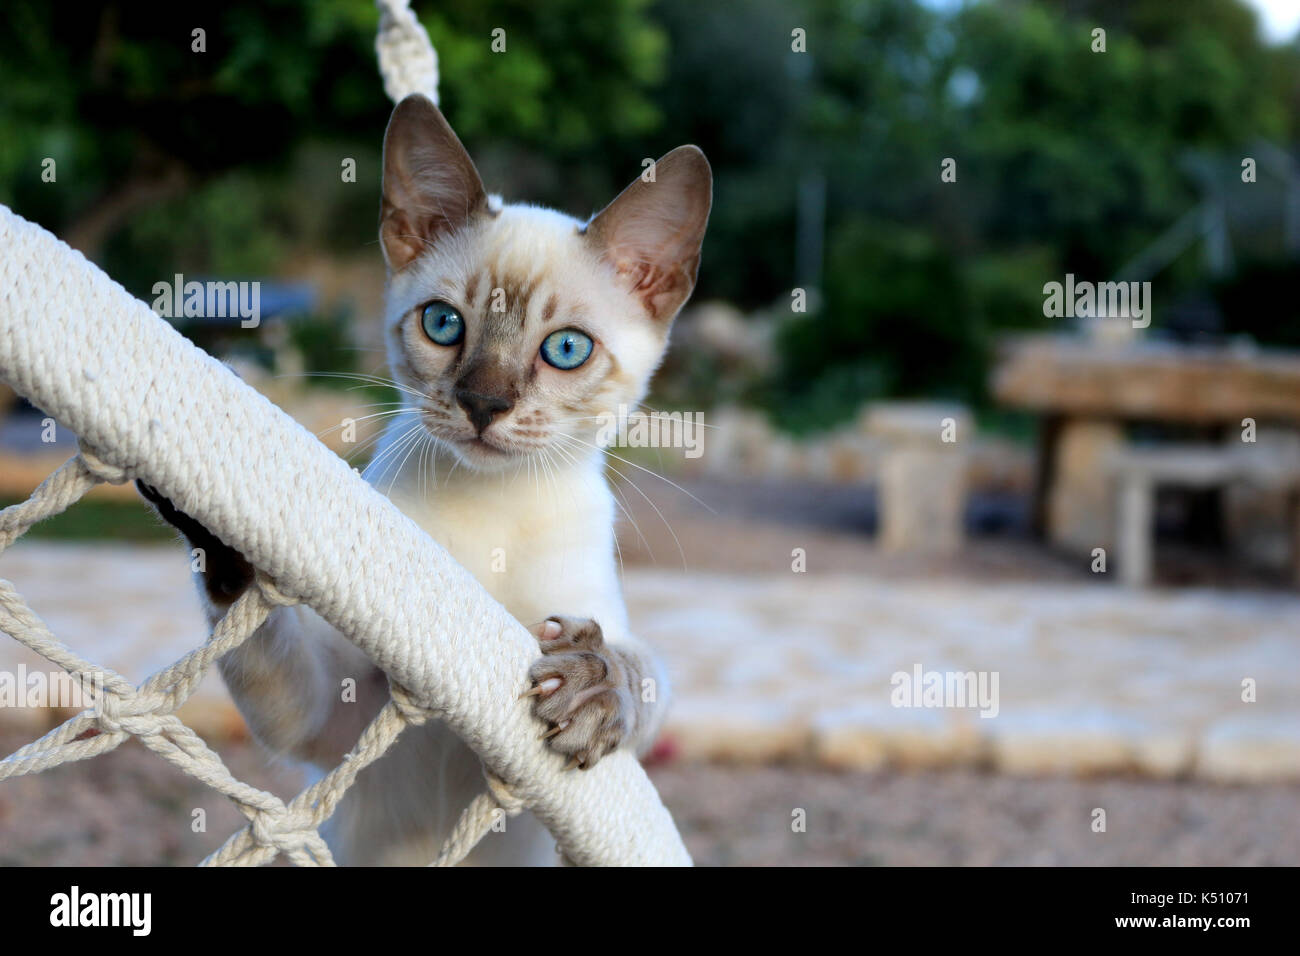 Snowbengal, seal lynx point Spotted Tabby, giocando in giardino Foto Stock